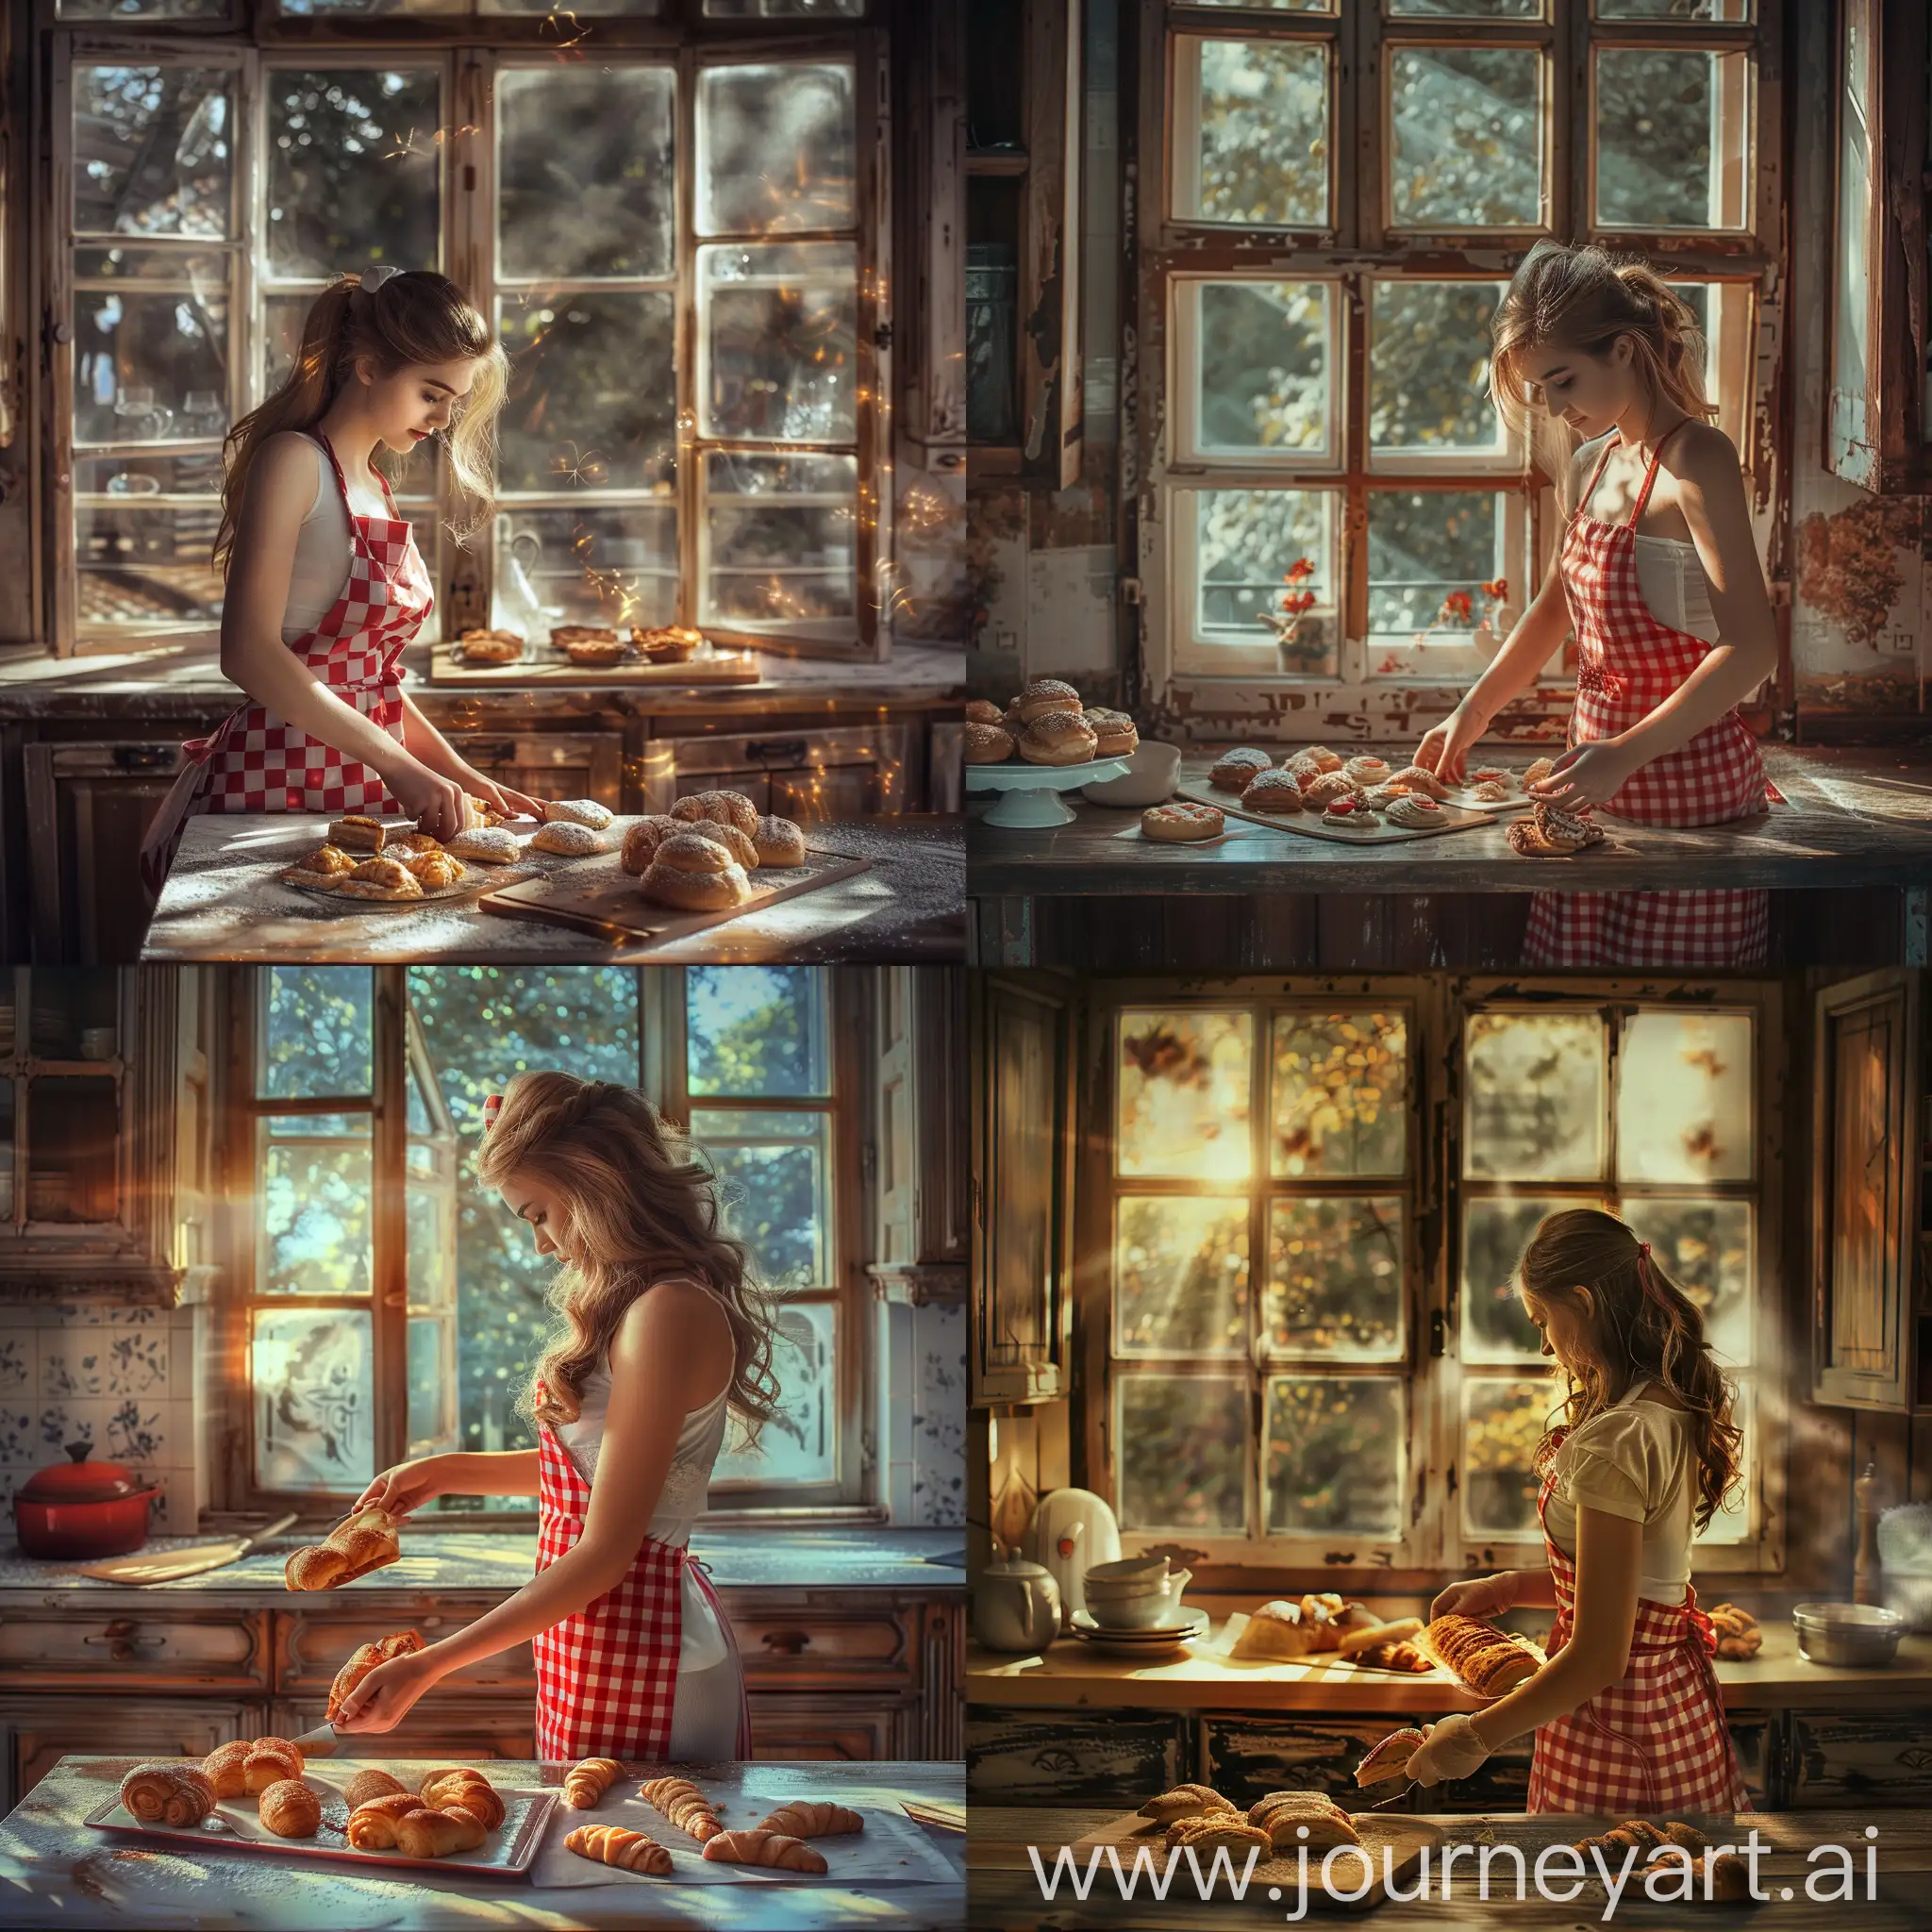 Young-Woman-Baking-French-Pastries-in-Rustic-Kitchen-with-Sunlit-Nature-View